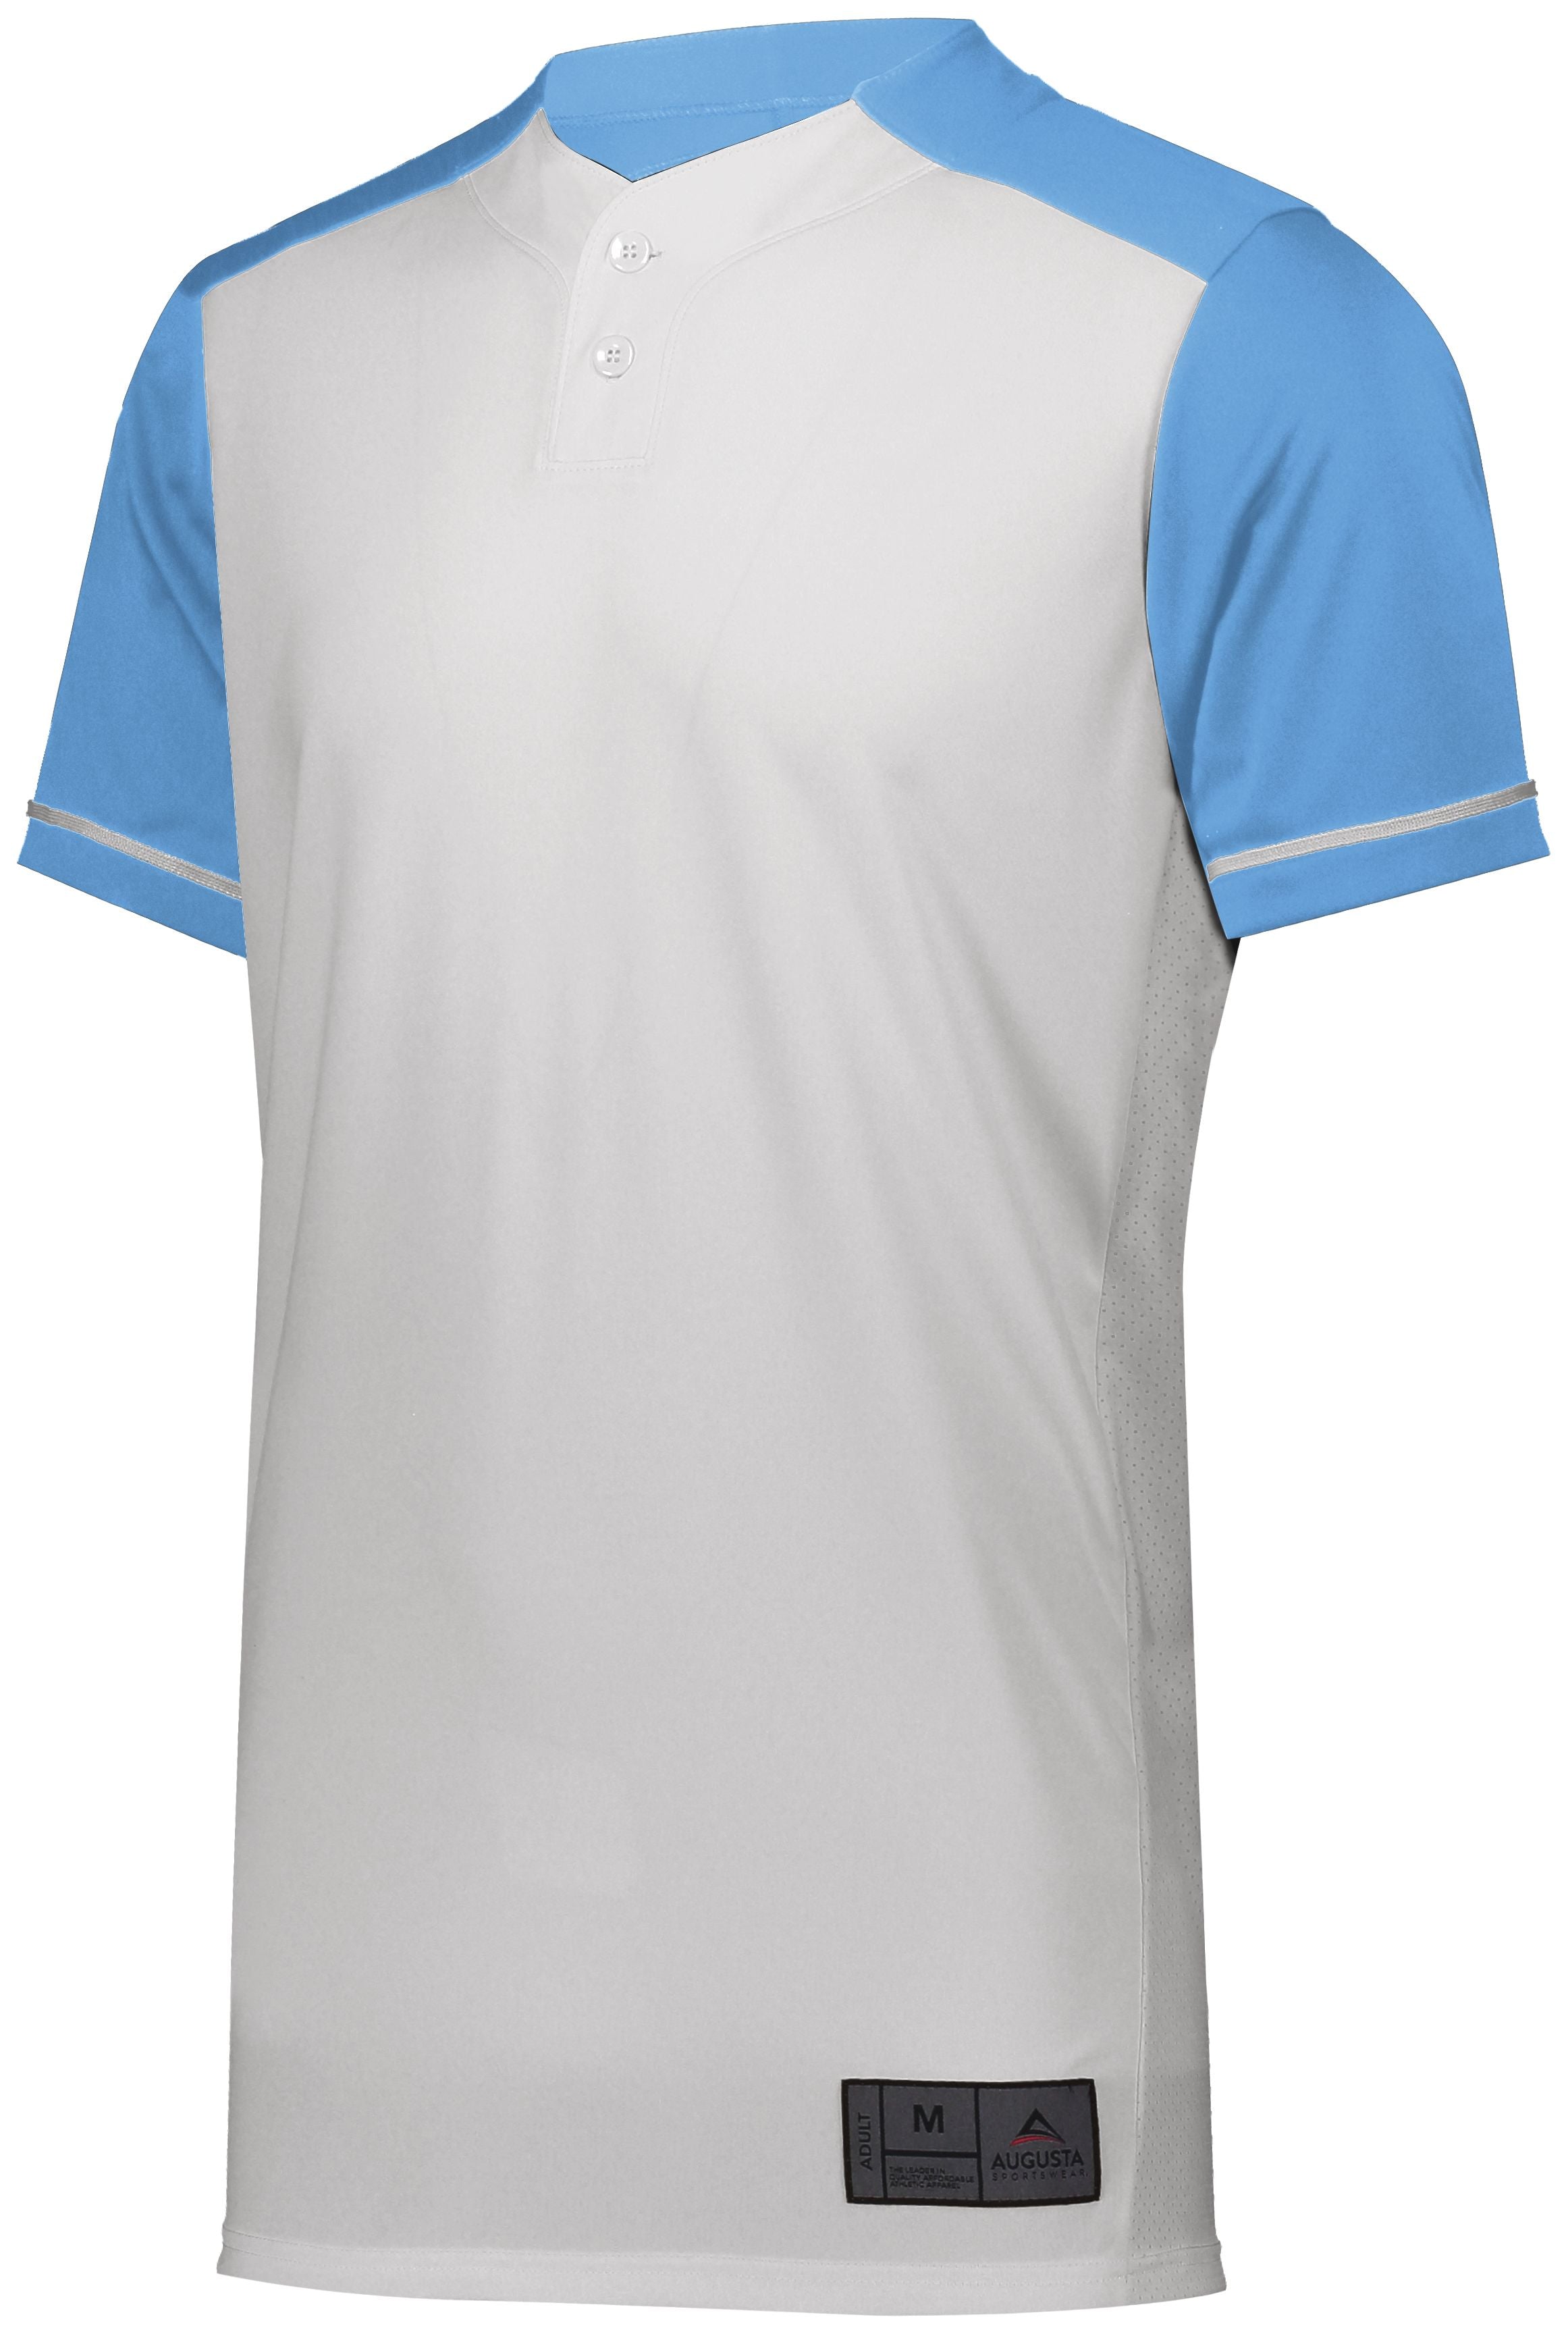 Augusta Sportswear Closer Jersey in White/Columbia Blue  -Part of the Adult, Adult-Jersey, Augusta-Products, Baseball, Shirts, All-Sports, All-Sports-1 product lines at KanaleyCreations.com